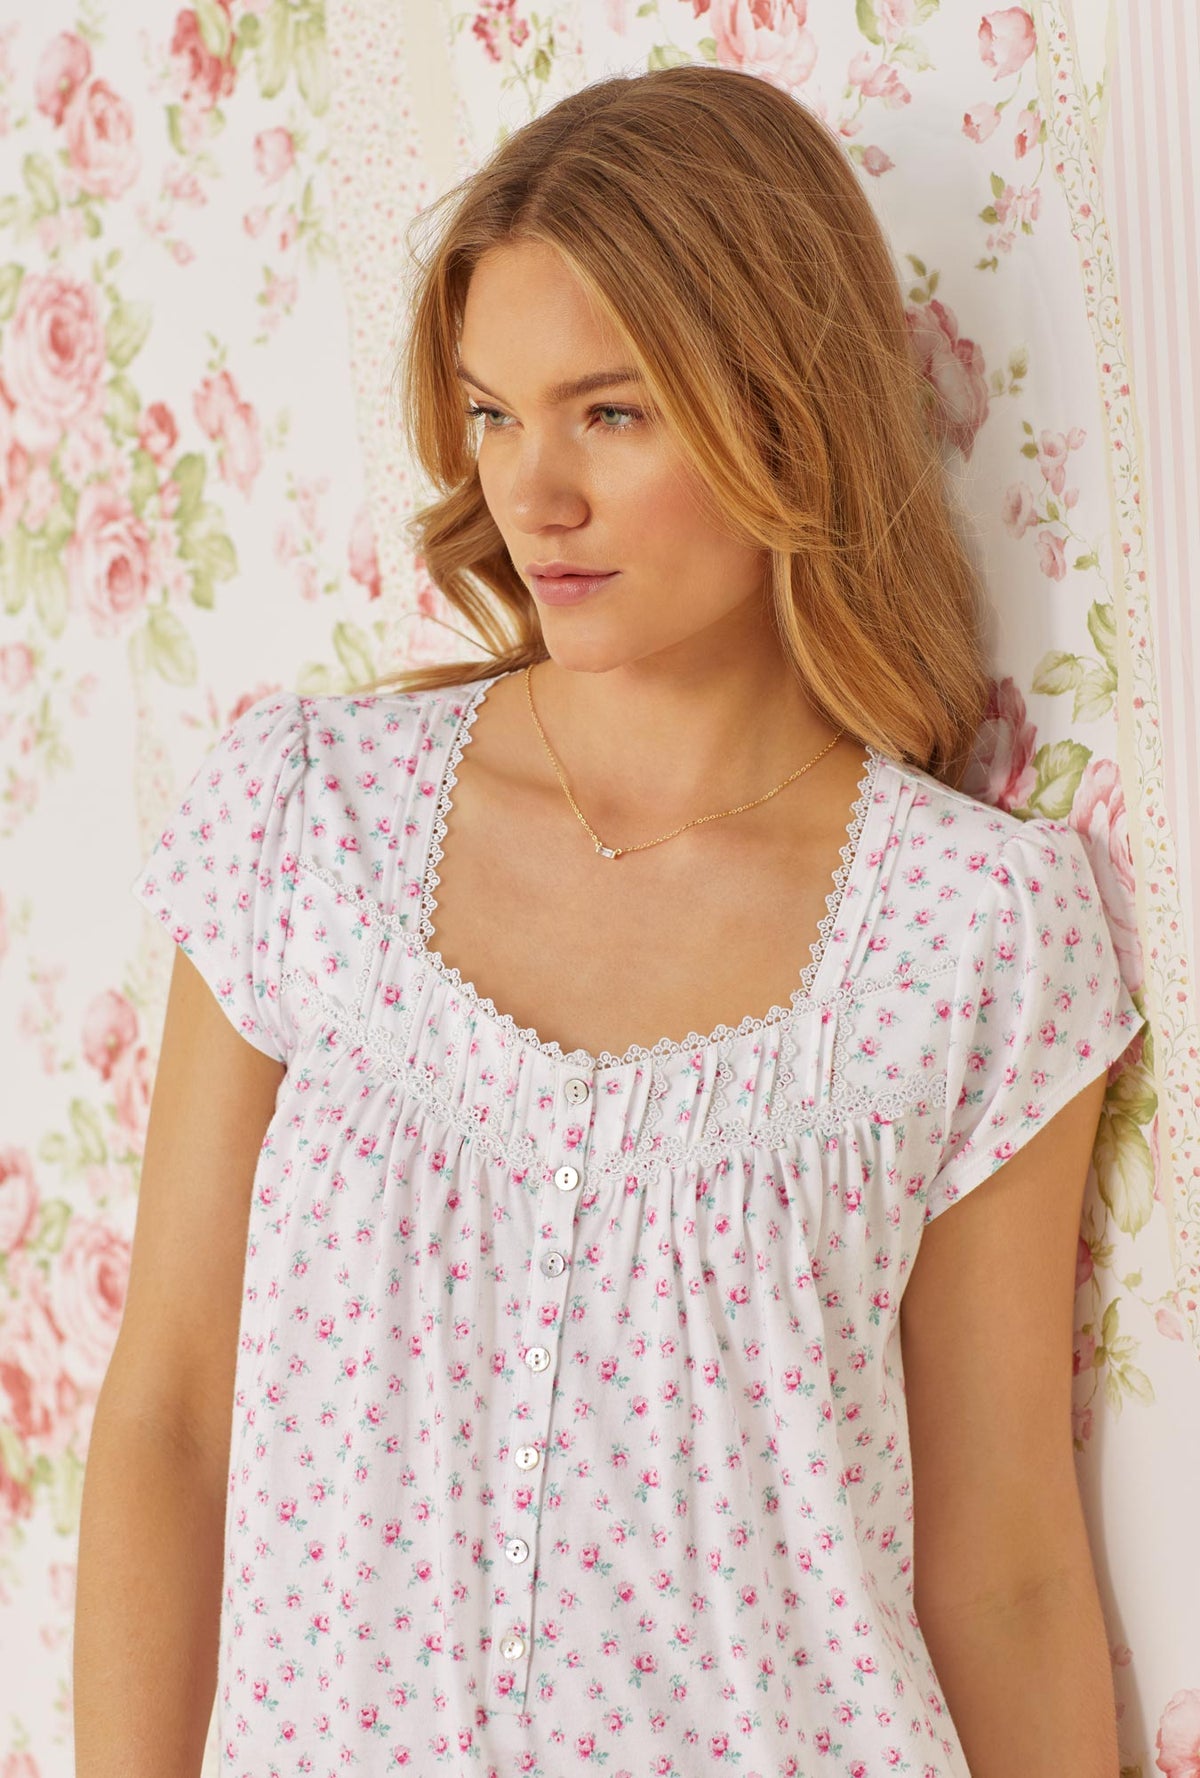 A lady wearing pink cap sleeve short cotton knit nightgown with joyful rose print.